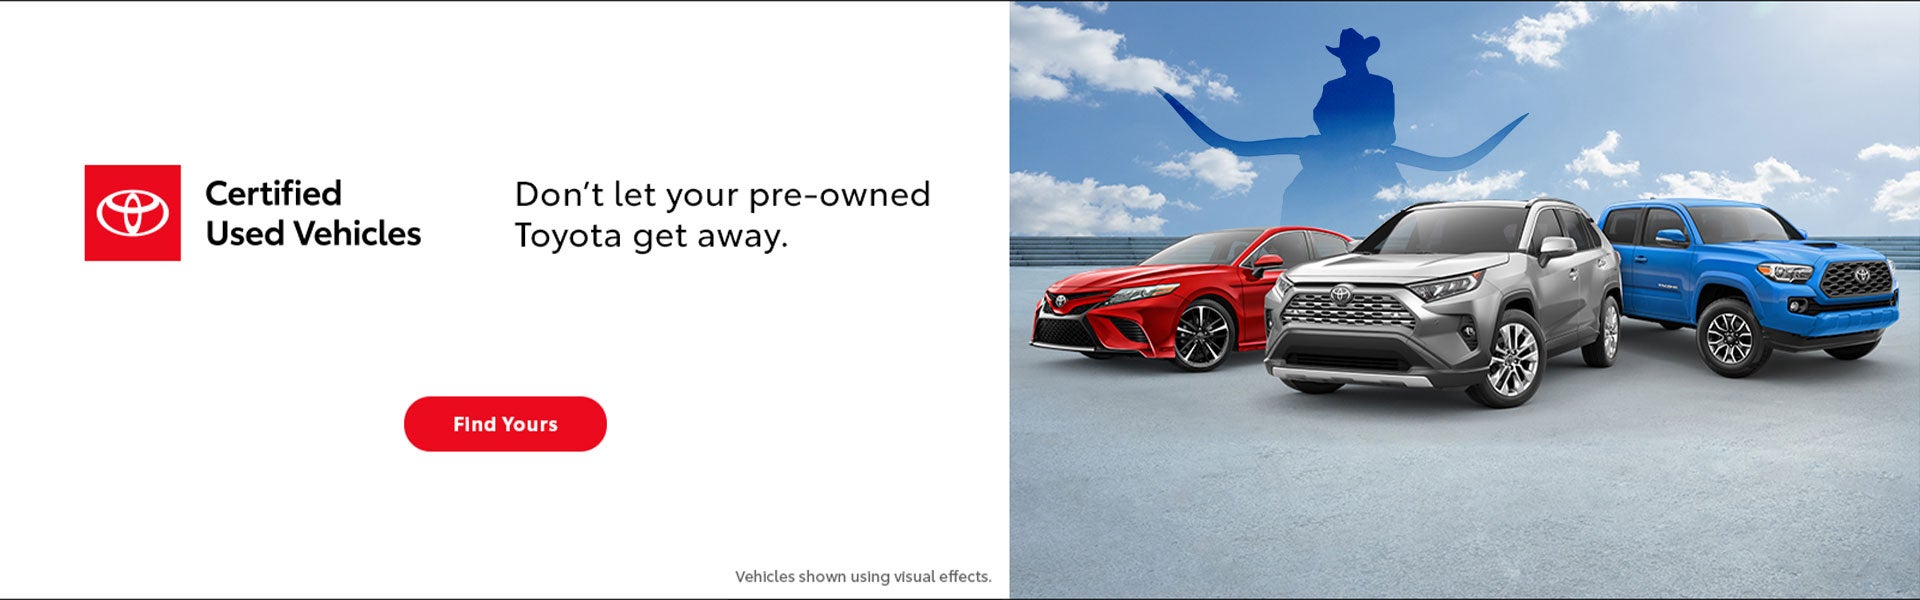 Don't let your Pre-Owned Toyota get away!